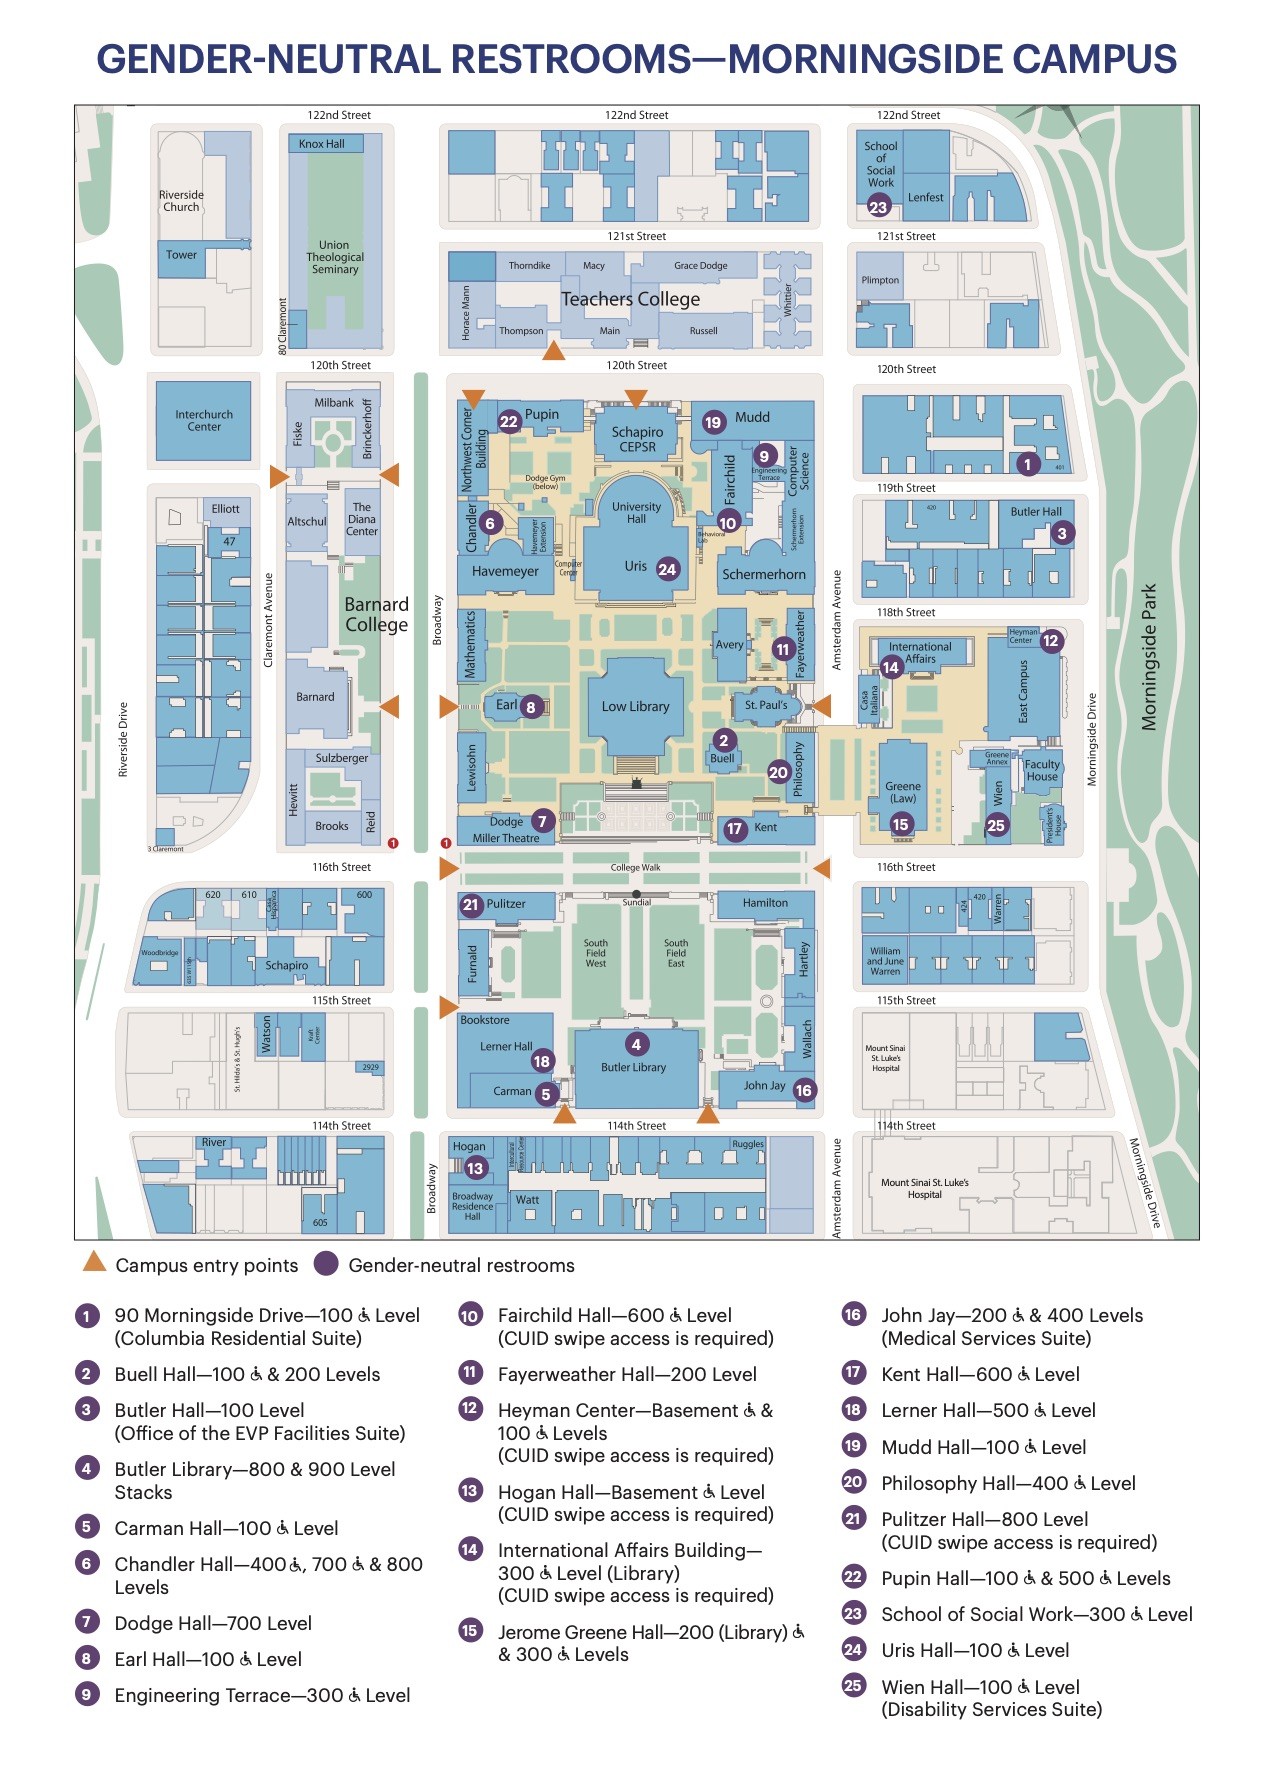 A map of gender-neutral restrooms on the Morningside Campus